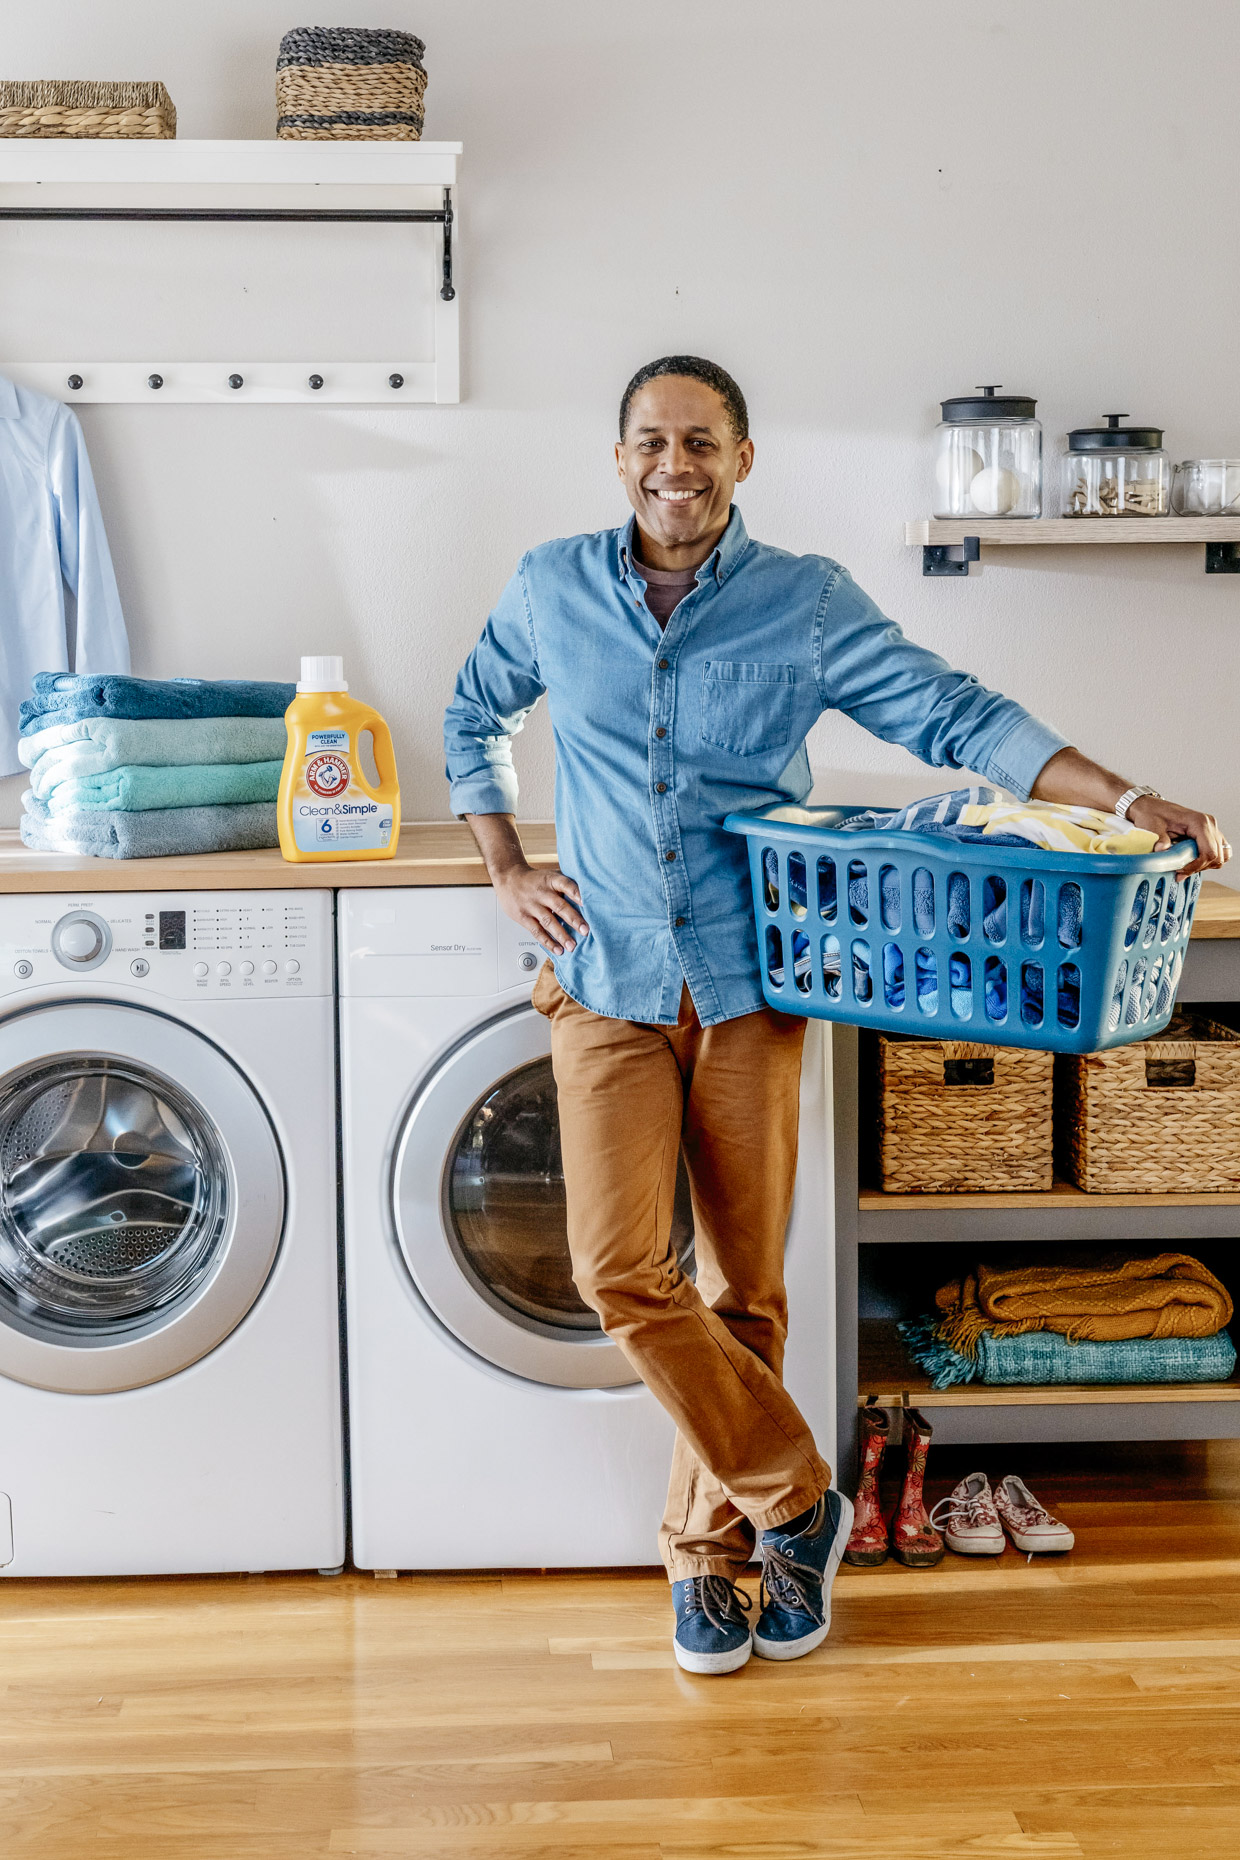 Smiling man with bottle of Arm and Hammer detergent and basket of laundry